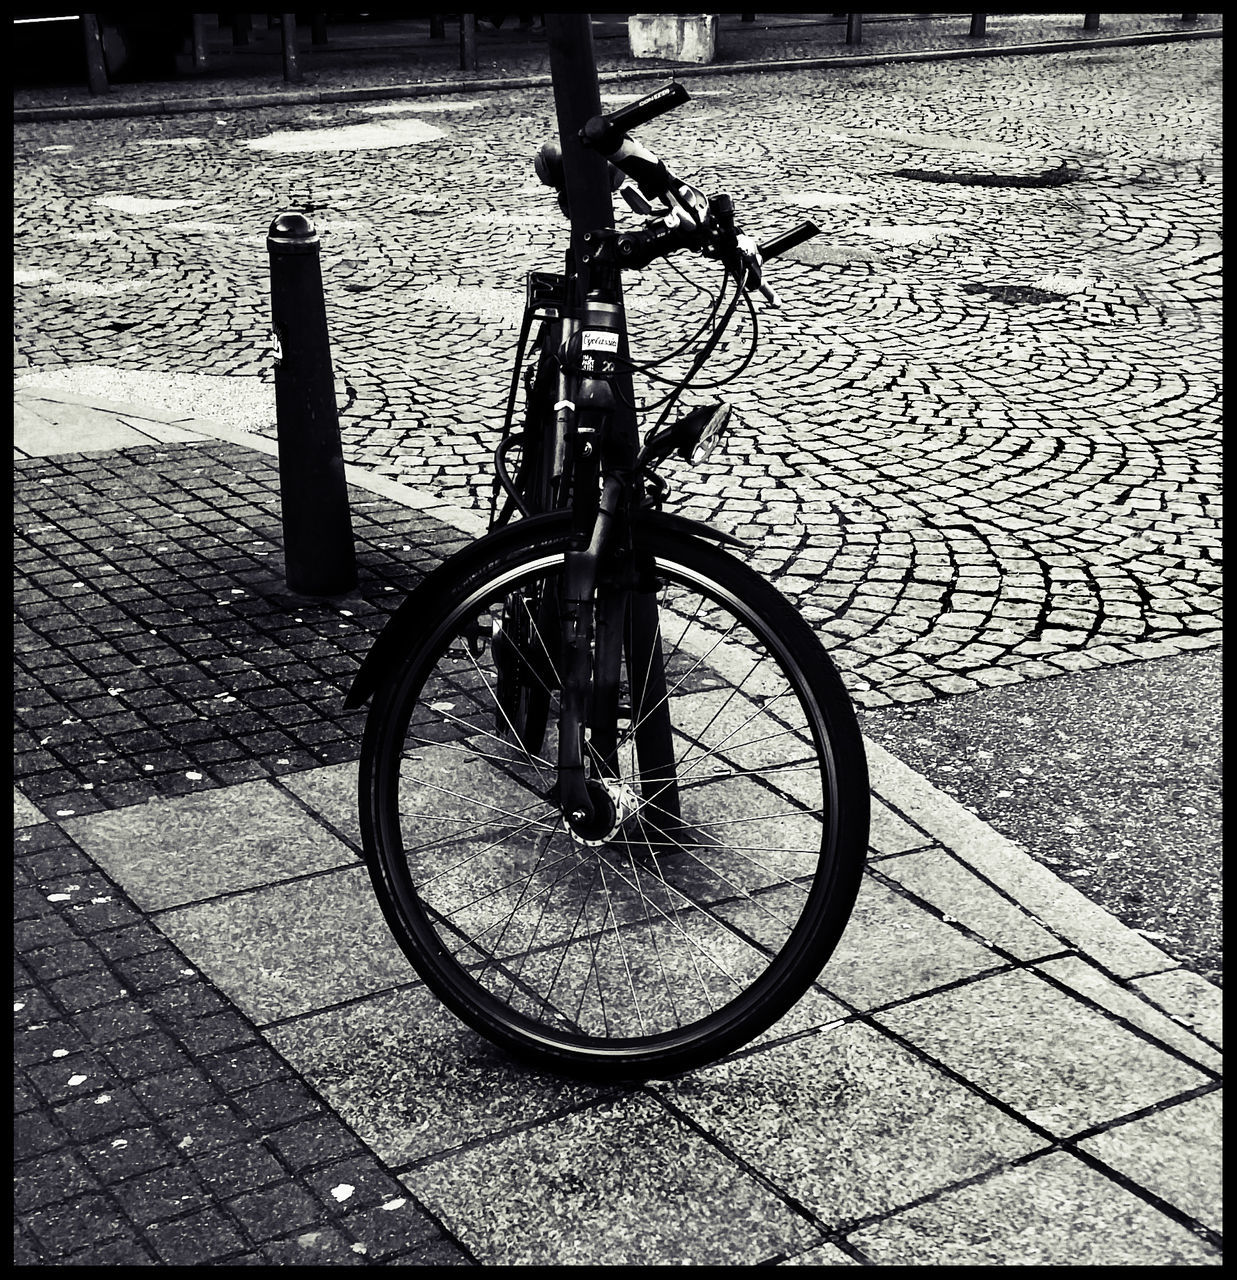 VIEW OF BICYCLE PARKED